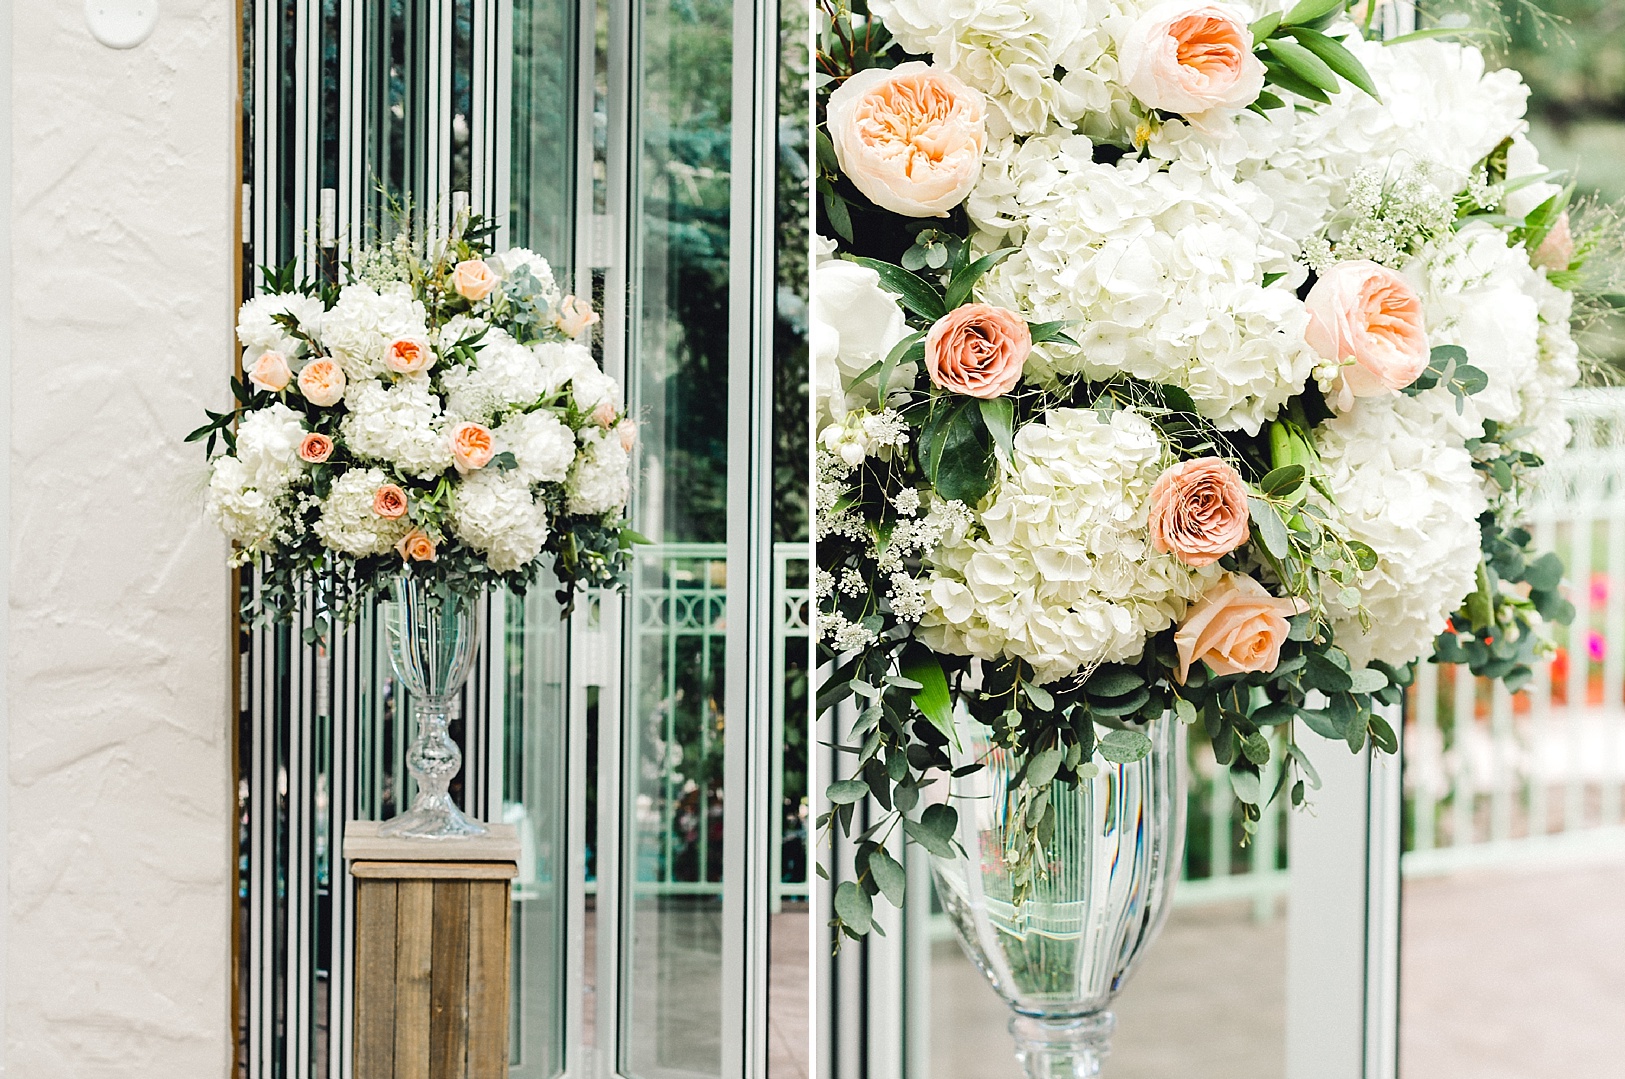 Classic floral arrangements with peonies, garden roses, and hydrangea for an elegant wedding